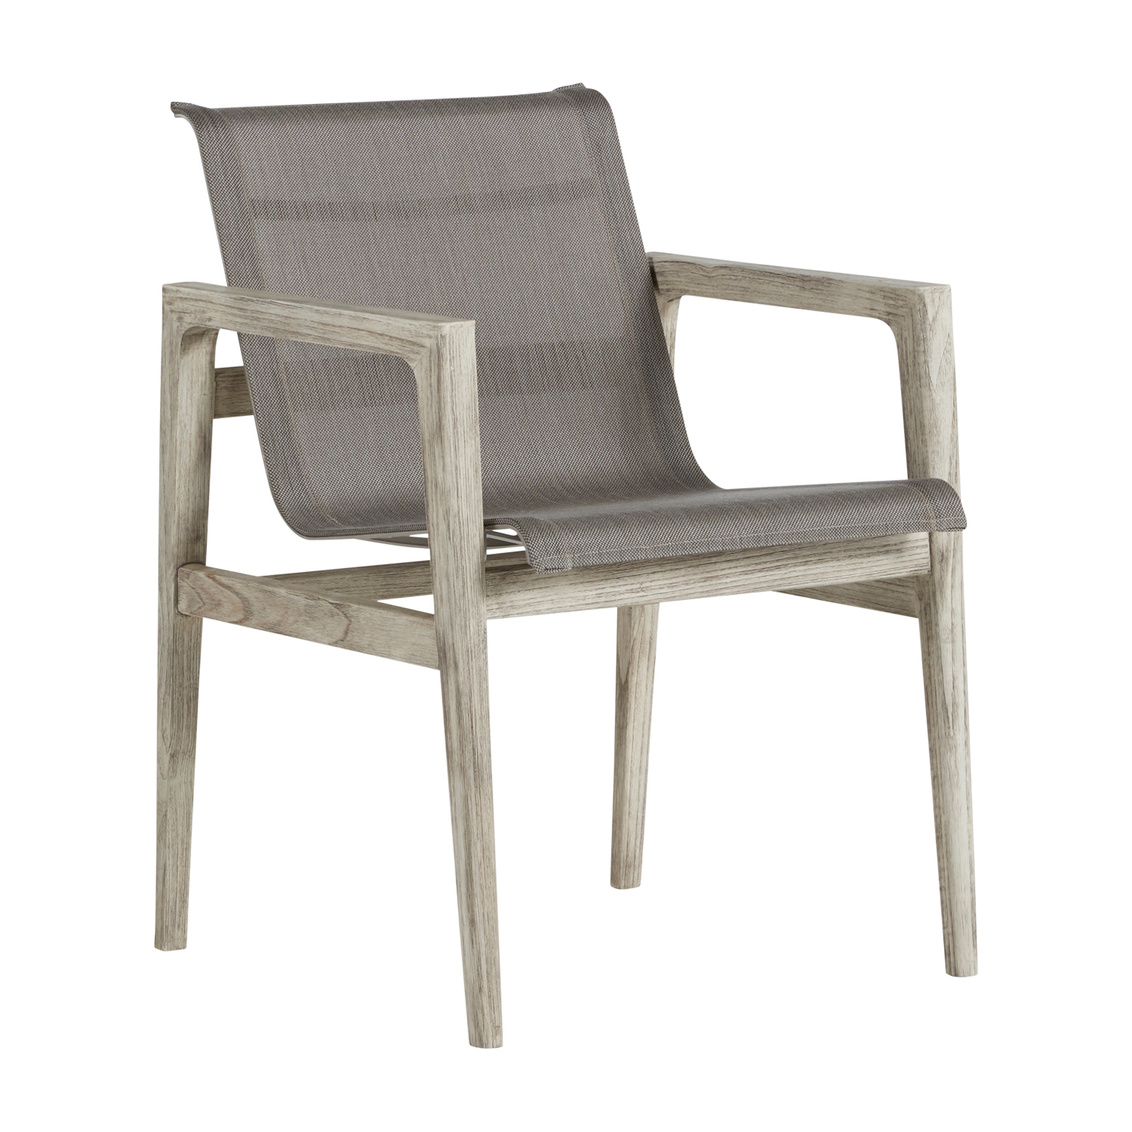 coast teak arm chair in oyster teak / heather grey sling product image